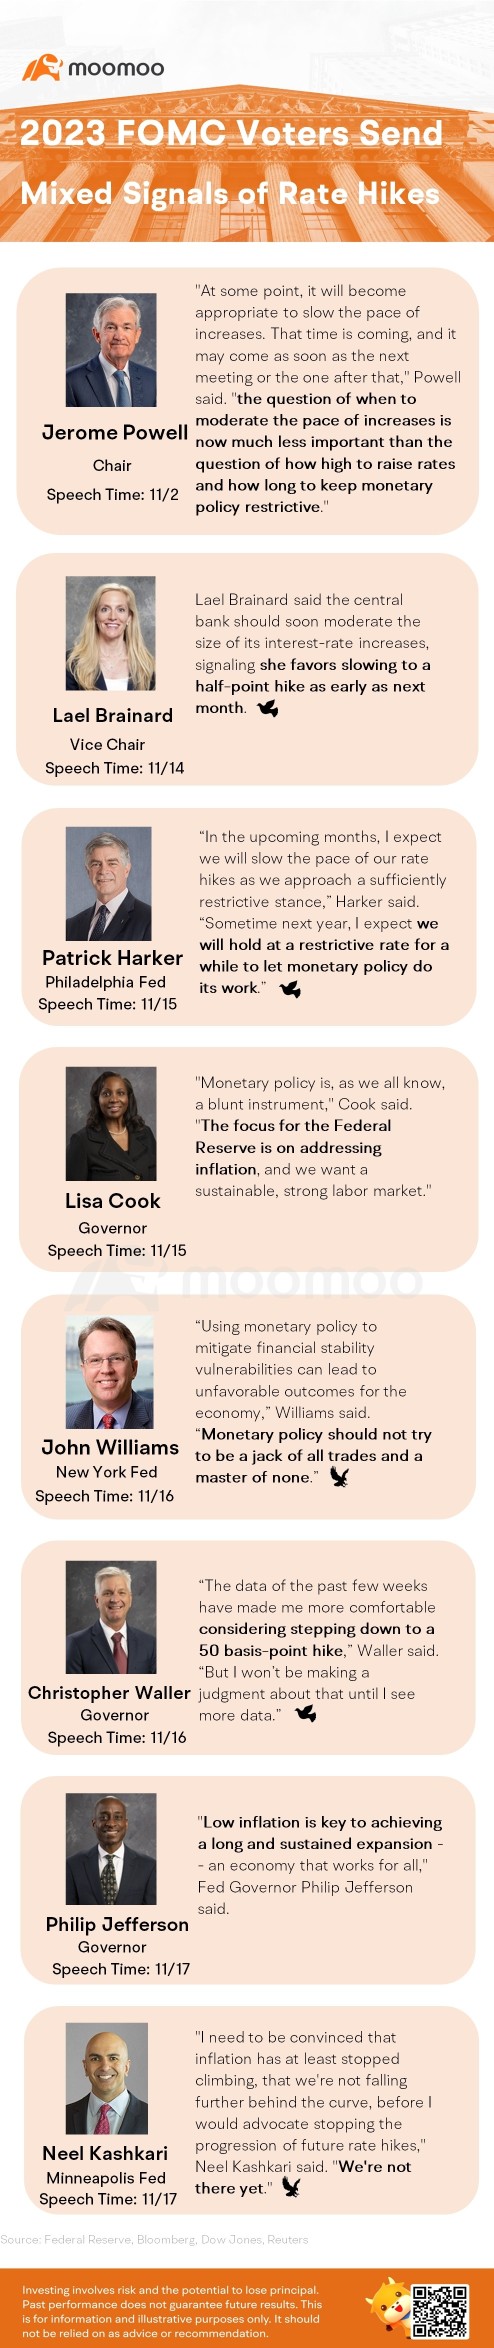 2023 Fed Voters Send Mixed Signals of Rate Hikes